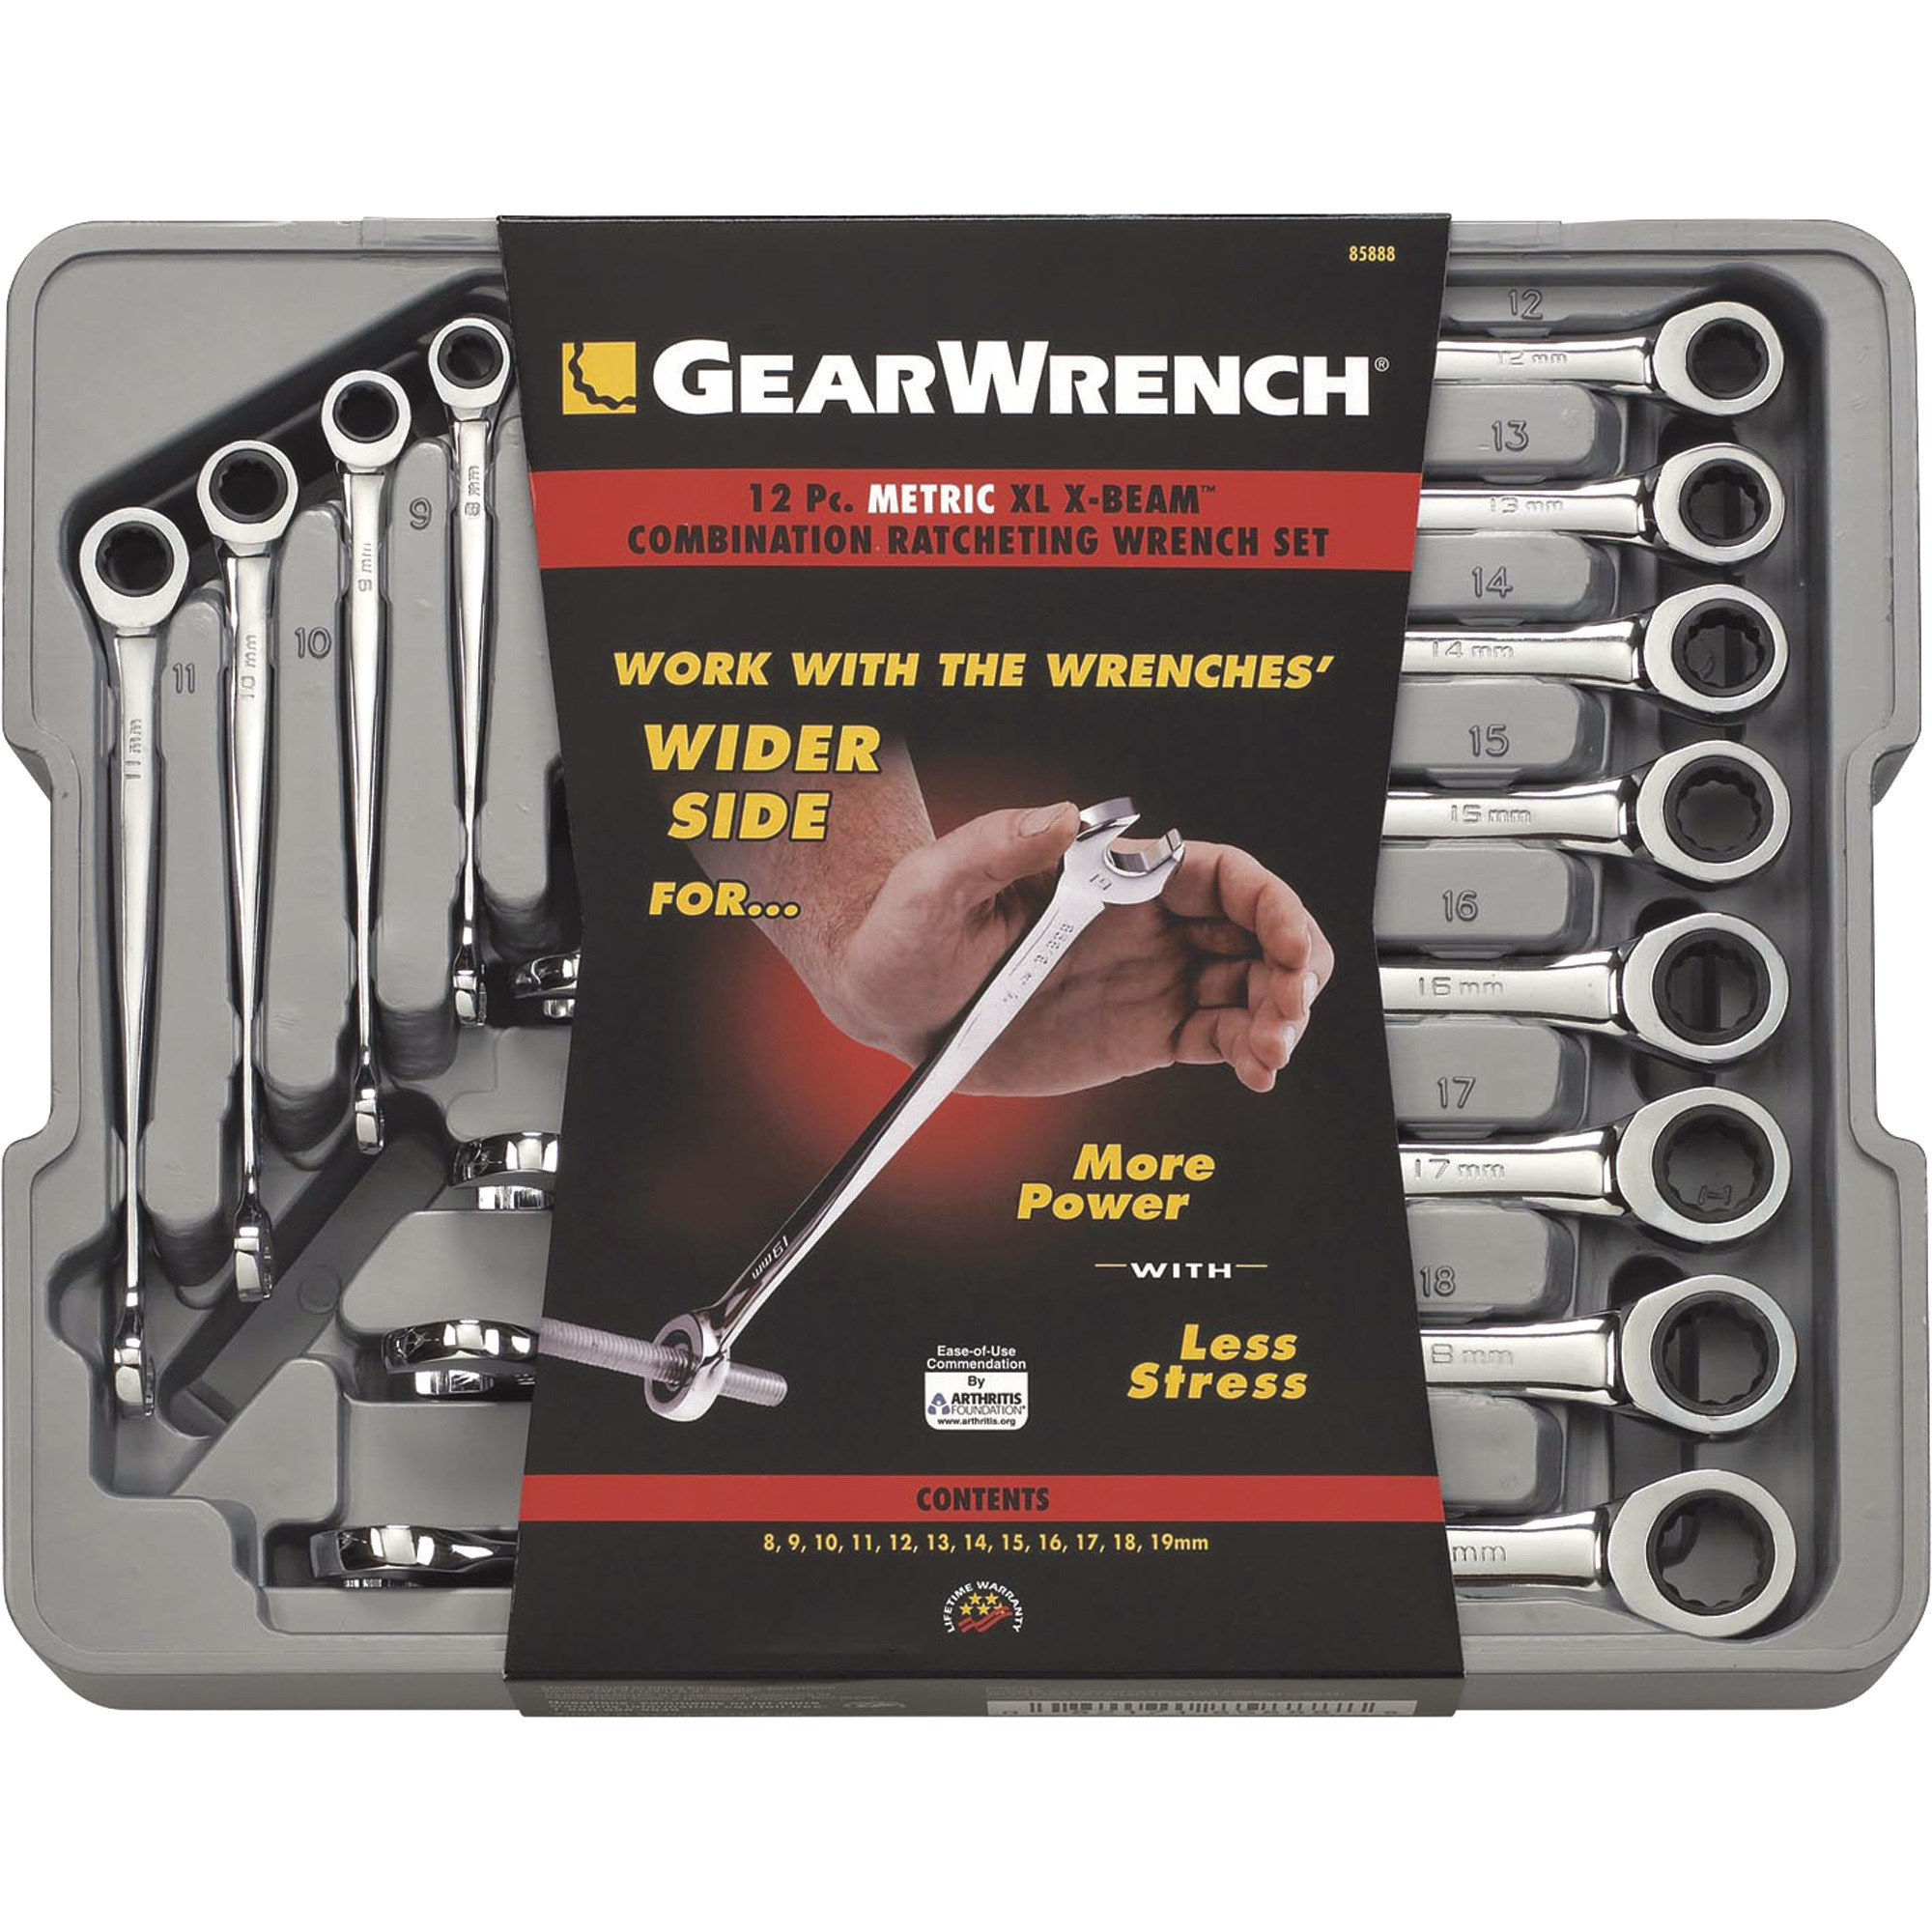 GearWrench Extra-Long X-Beam Ratcheting Combination Wrenches â 12-Piece Metric Set, 8mmâ19mm, Model 85888